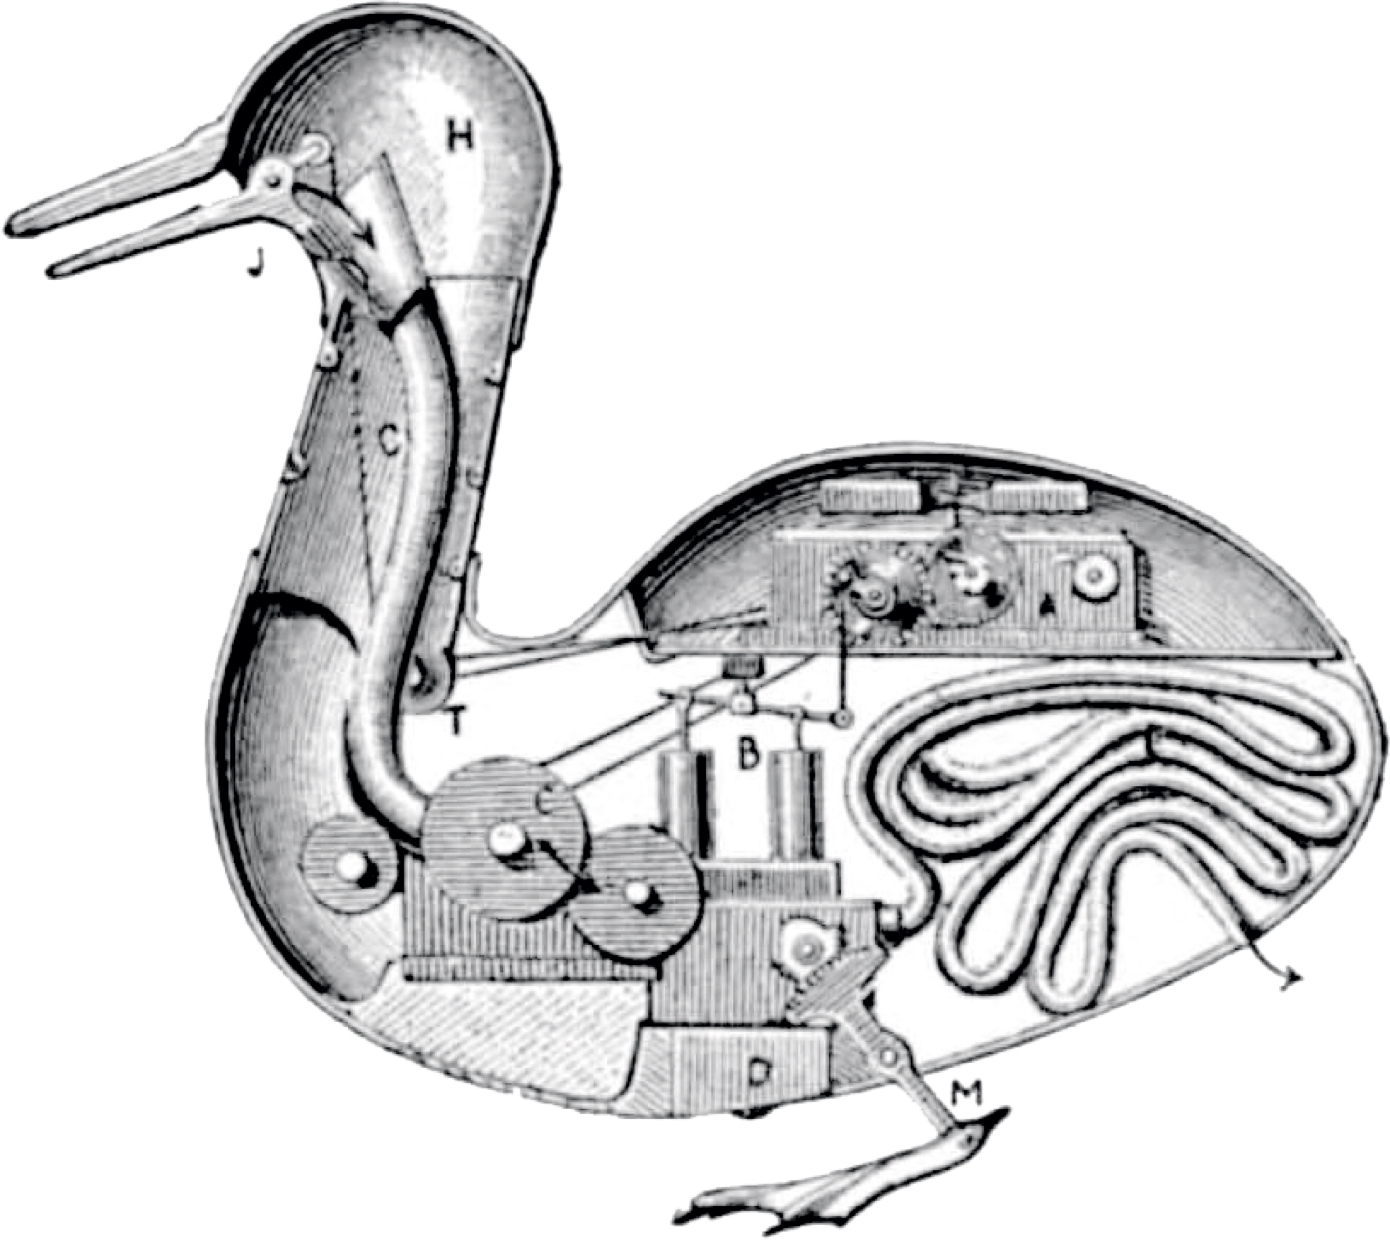 A Postulated interior of the duck of Vaucanson